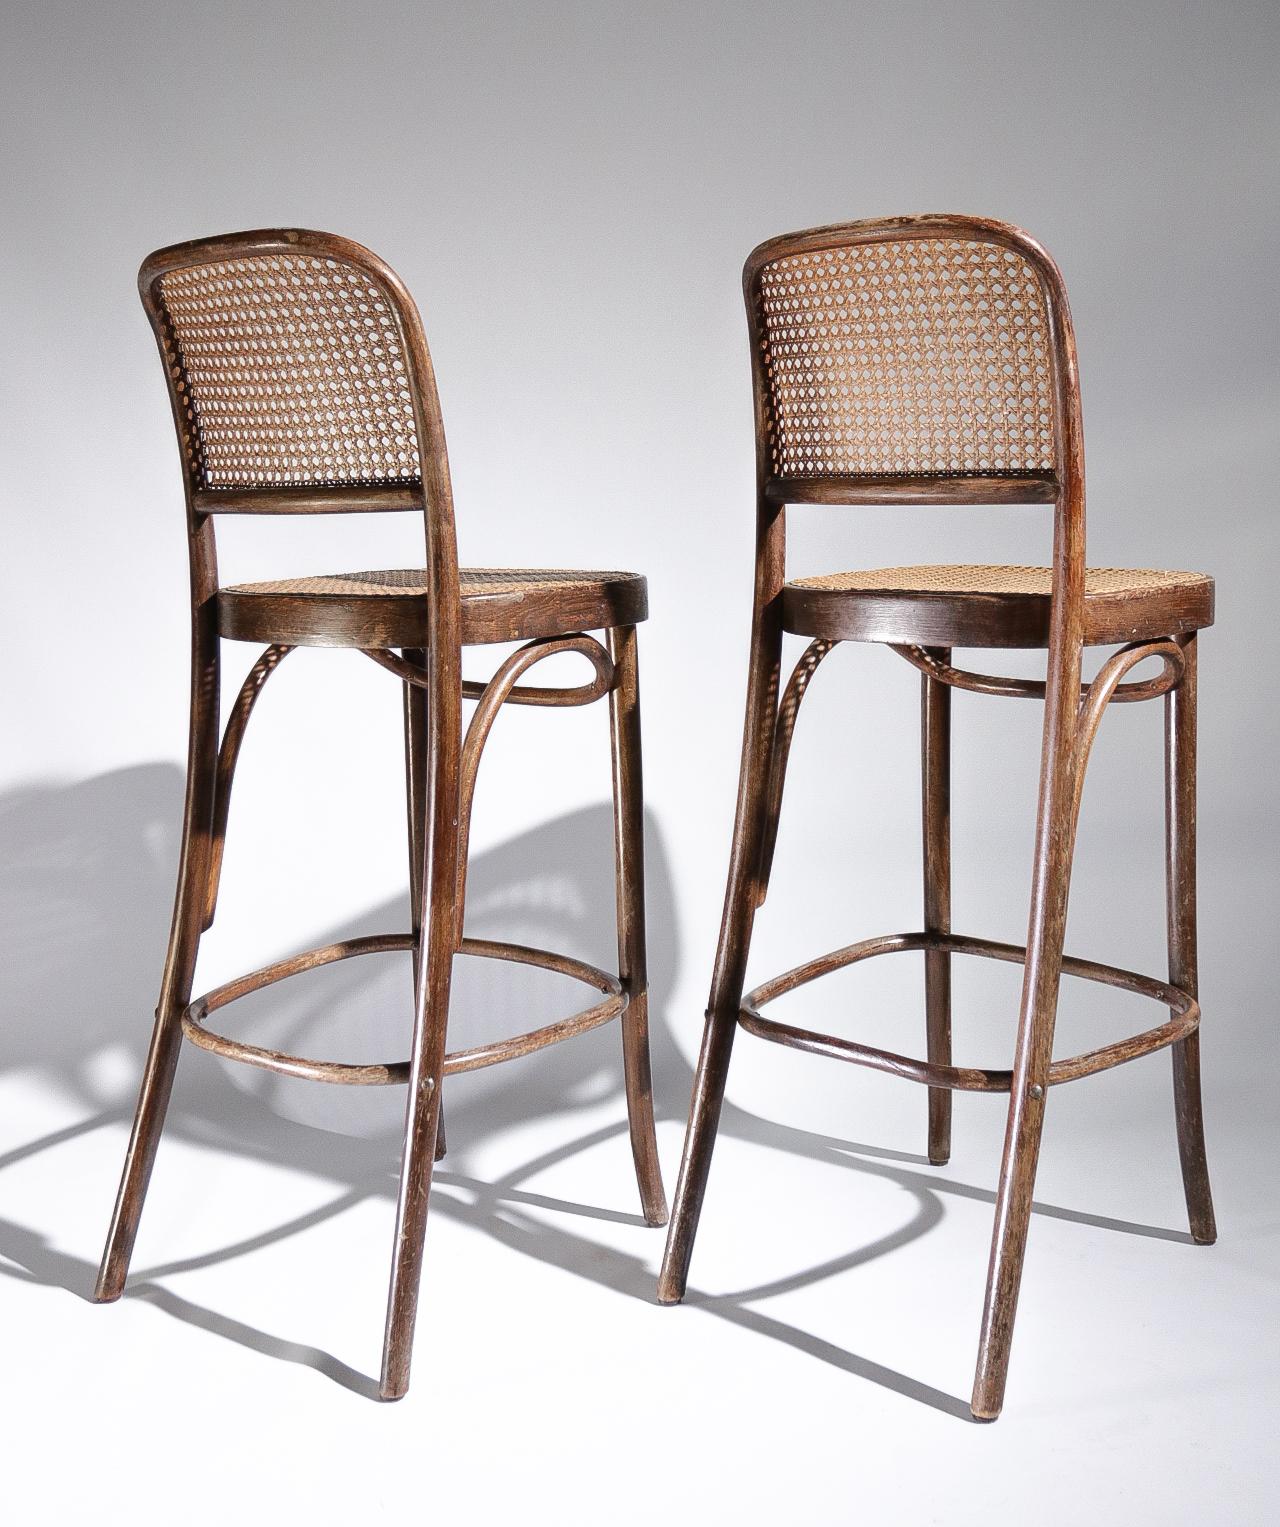 Iconic design, Thonet stools / bar stools made by FMG and designed by Josef Hoffman.
Also known as design 811.
The stools are in good condition, 1 of the stools has some damage on the back to the webbing at the bottom as you can see in the